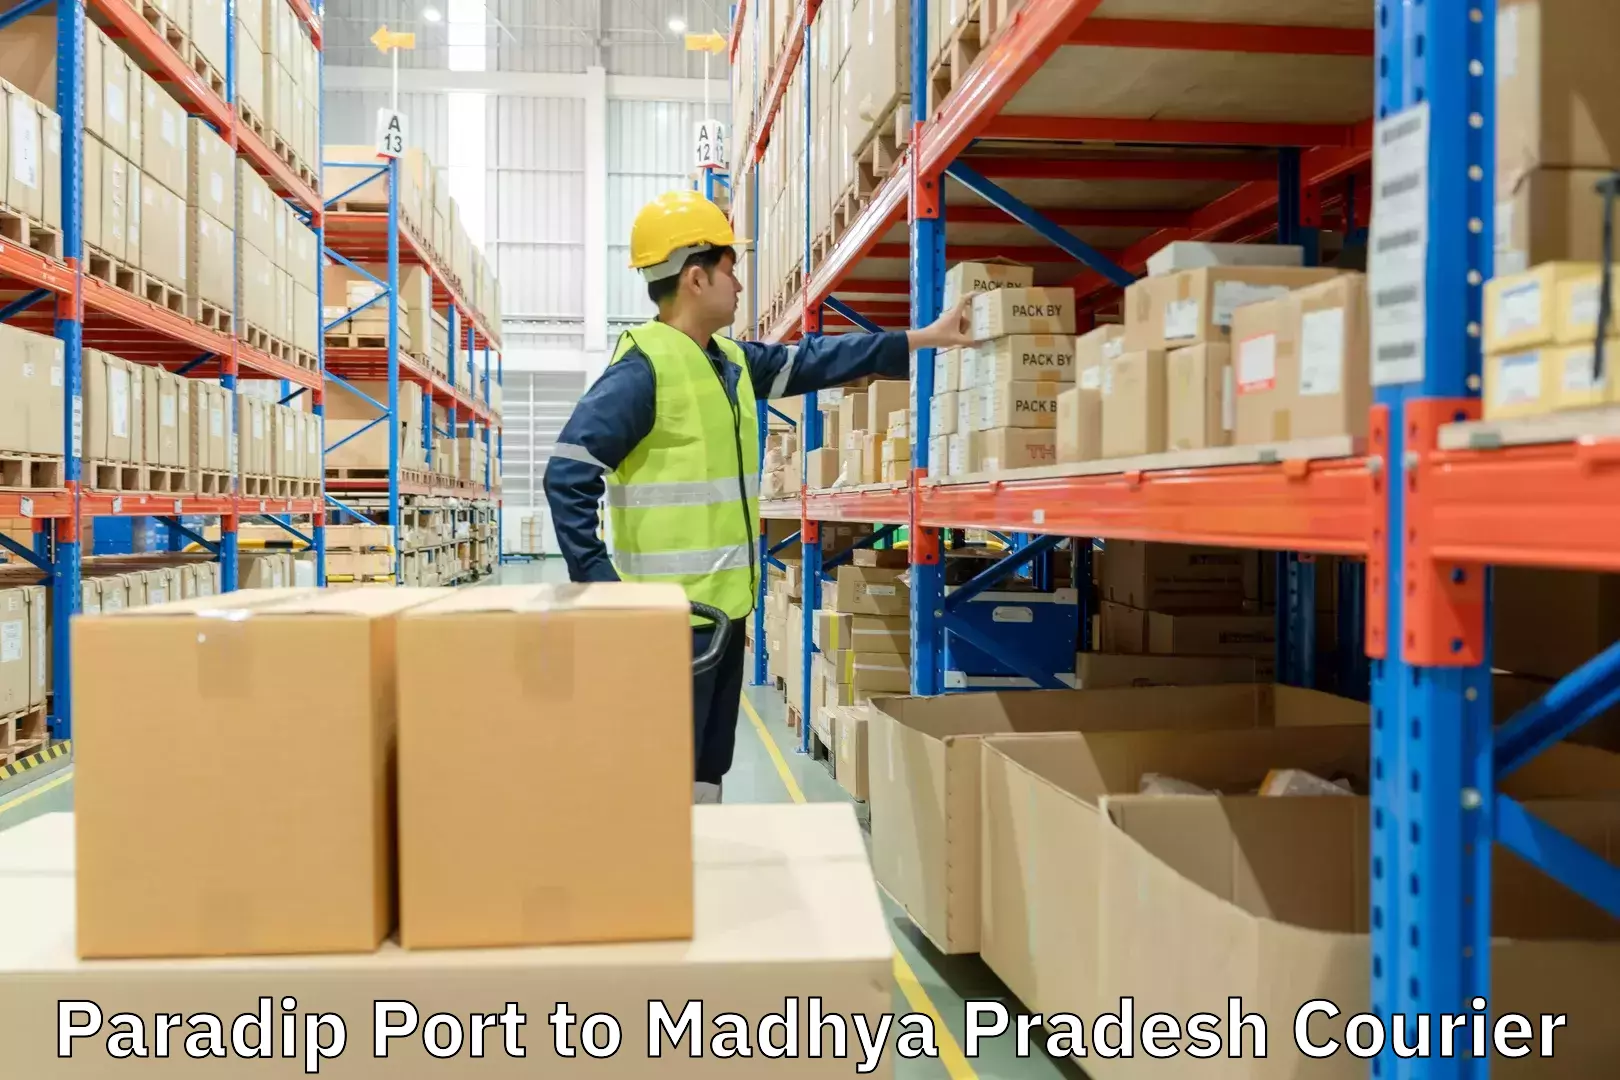 Weekend courier service Paradip Port to Madhya Pradesh